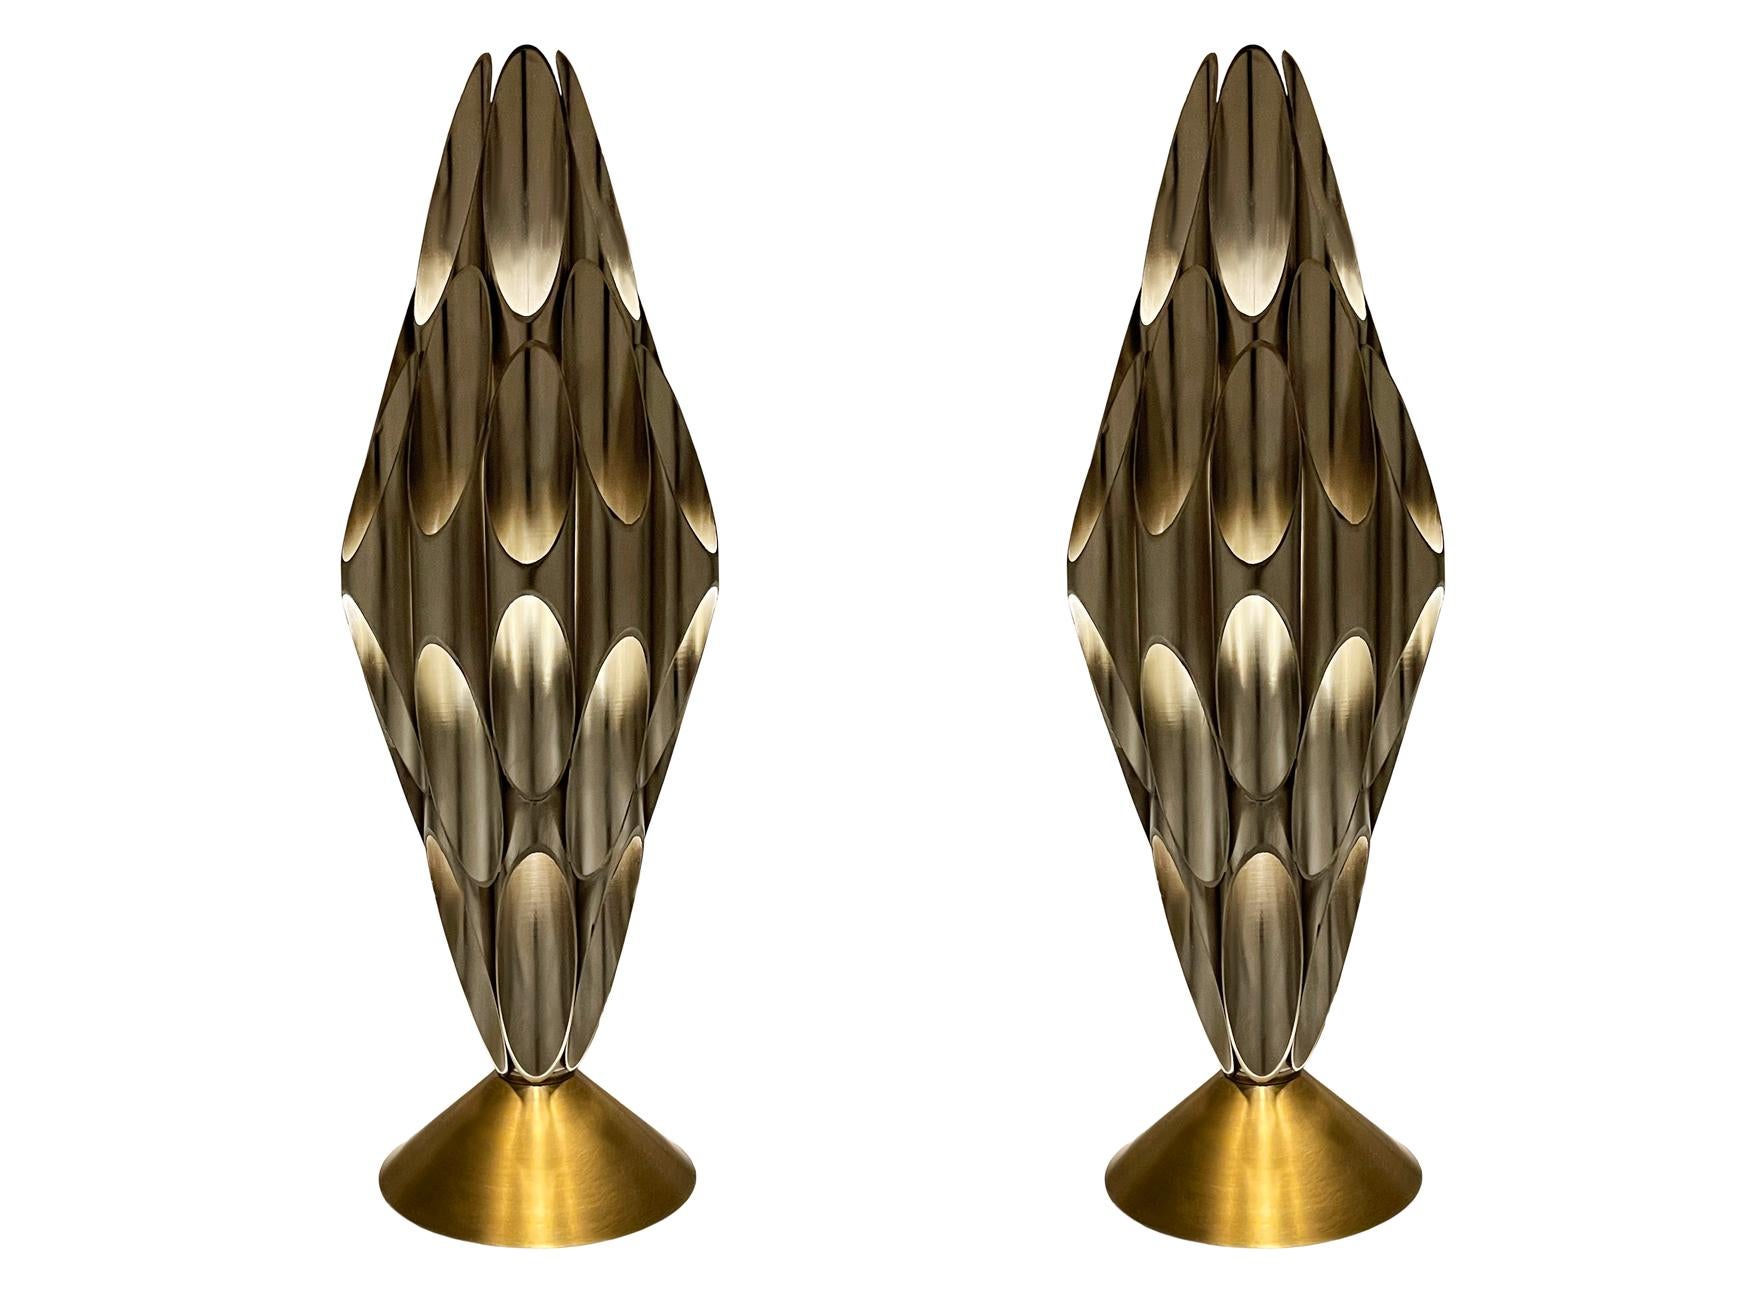 A pair of striking & chic tubular table lamps made by Designline. These feature heavy brass and nickel construction. Nice warm accent lighting. Takes one standard bulb. Cord is very long with built in switch.